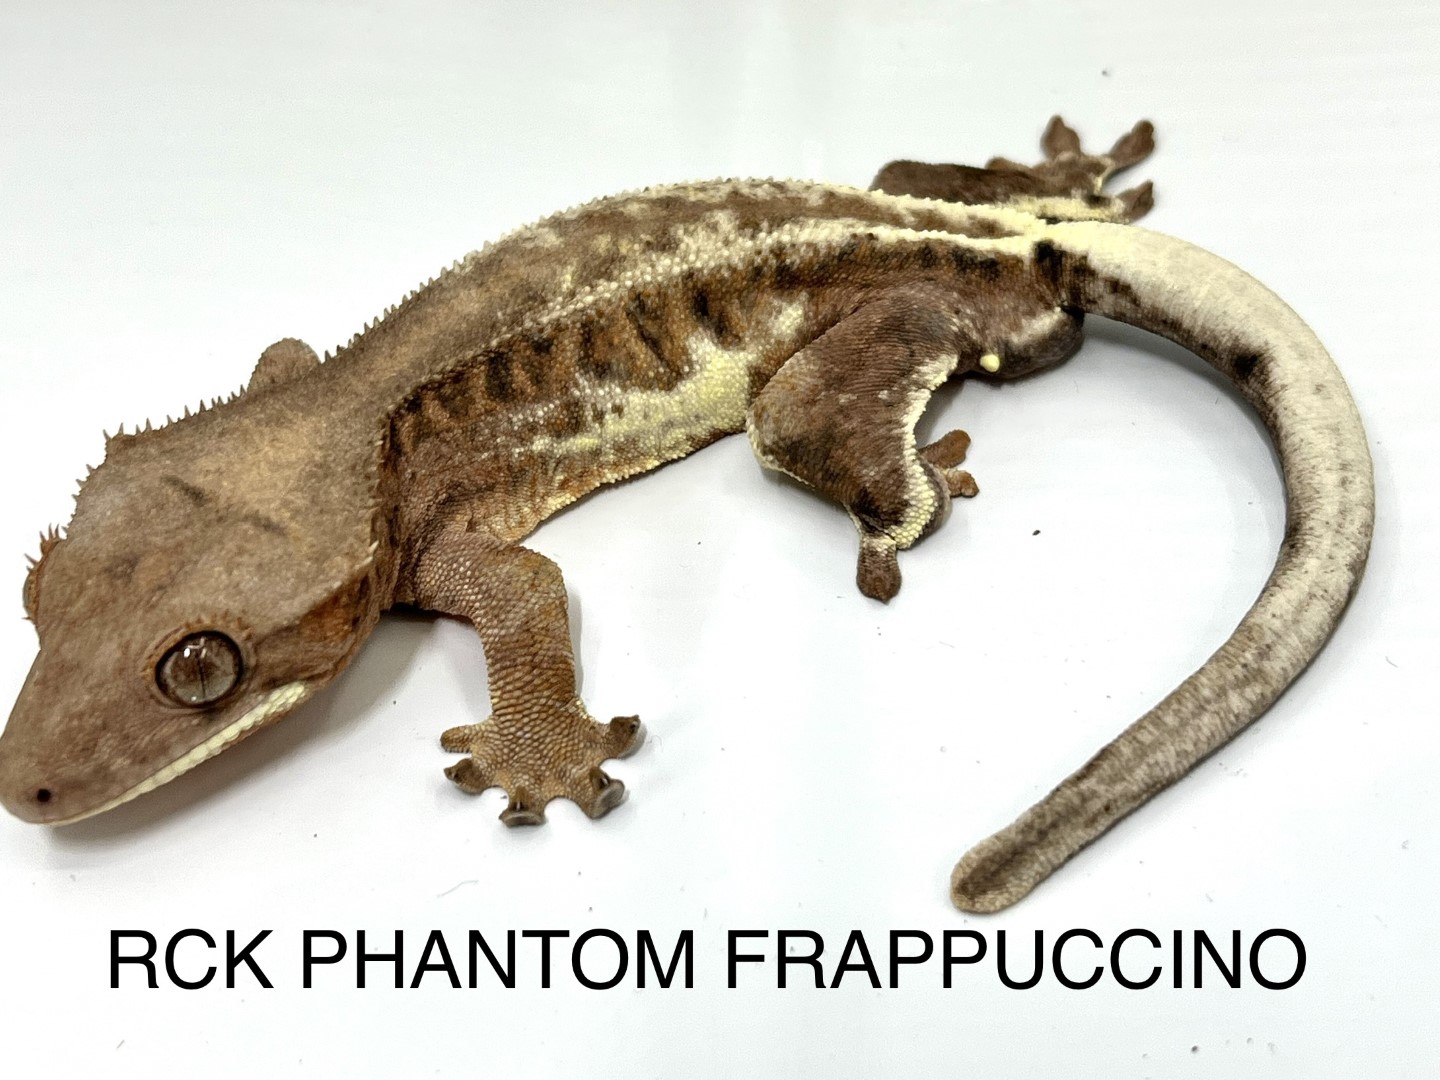 RCK Phantom Frappuccino by LIL MONSTER REPTILES